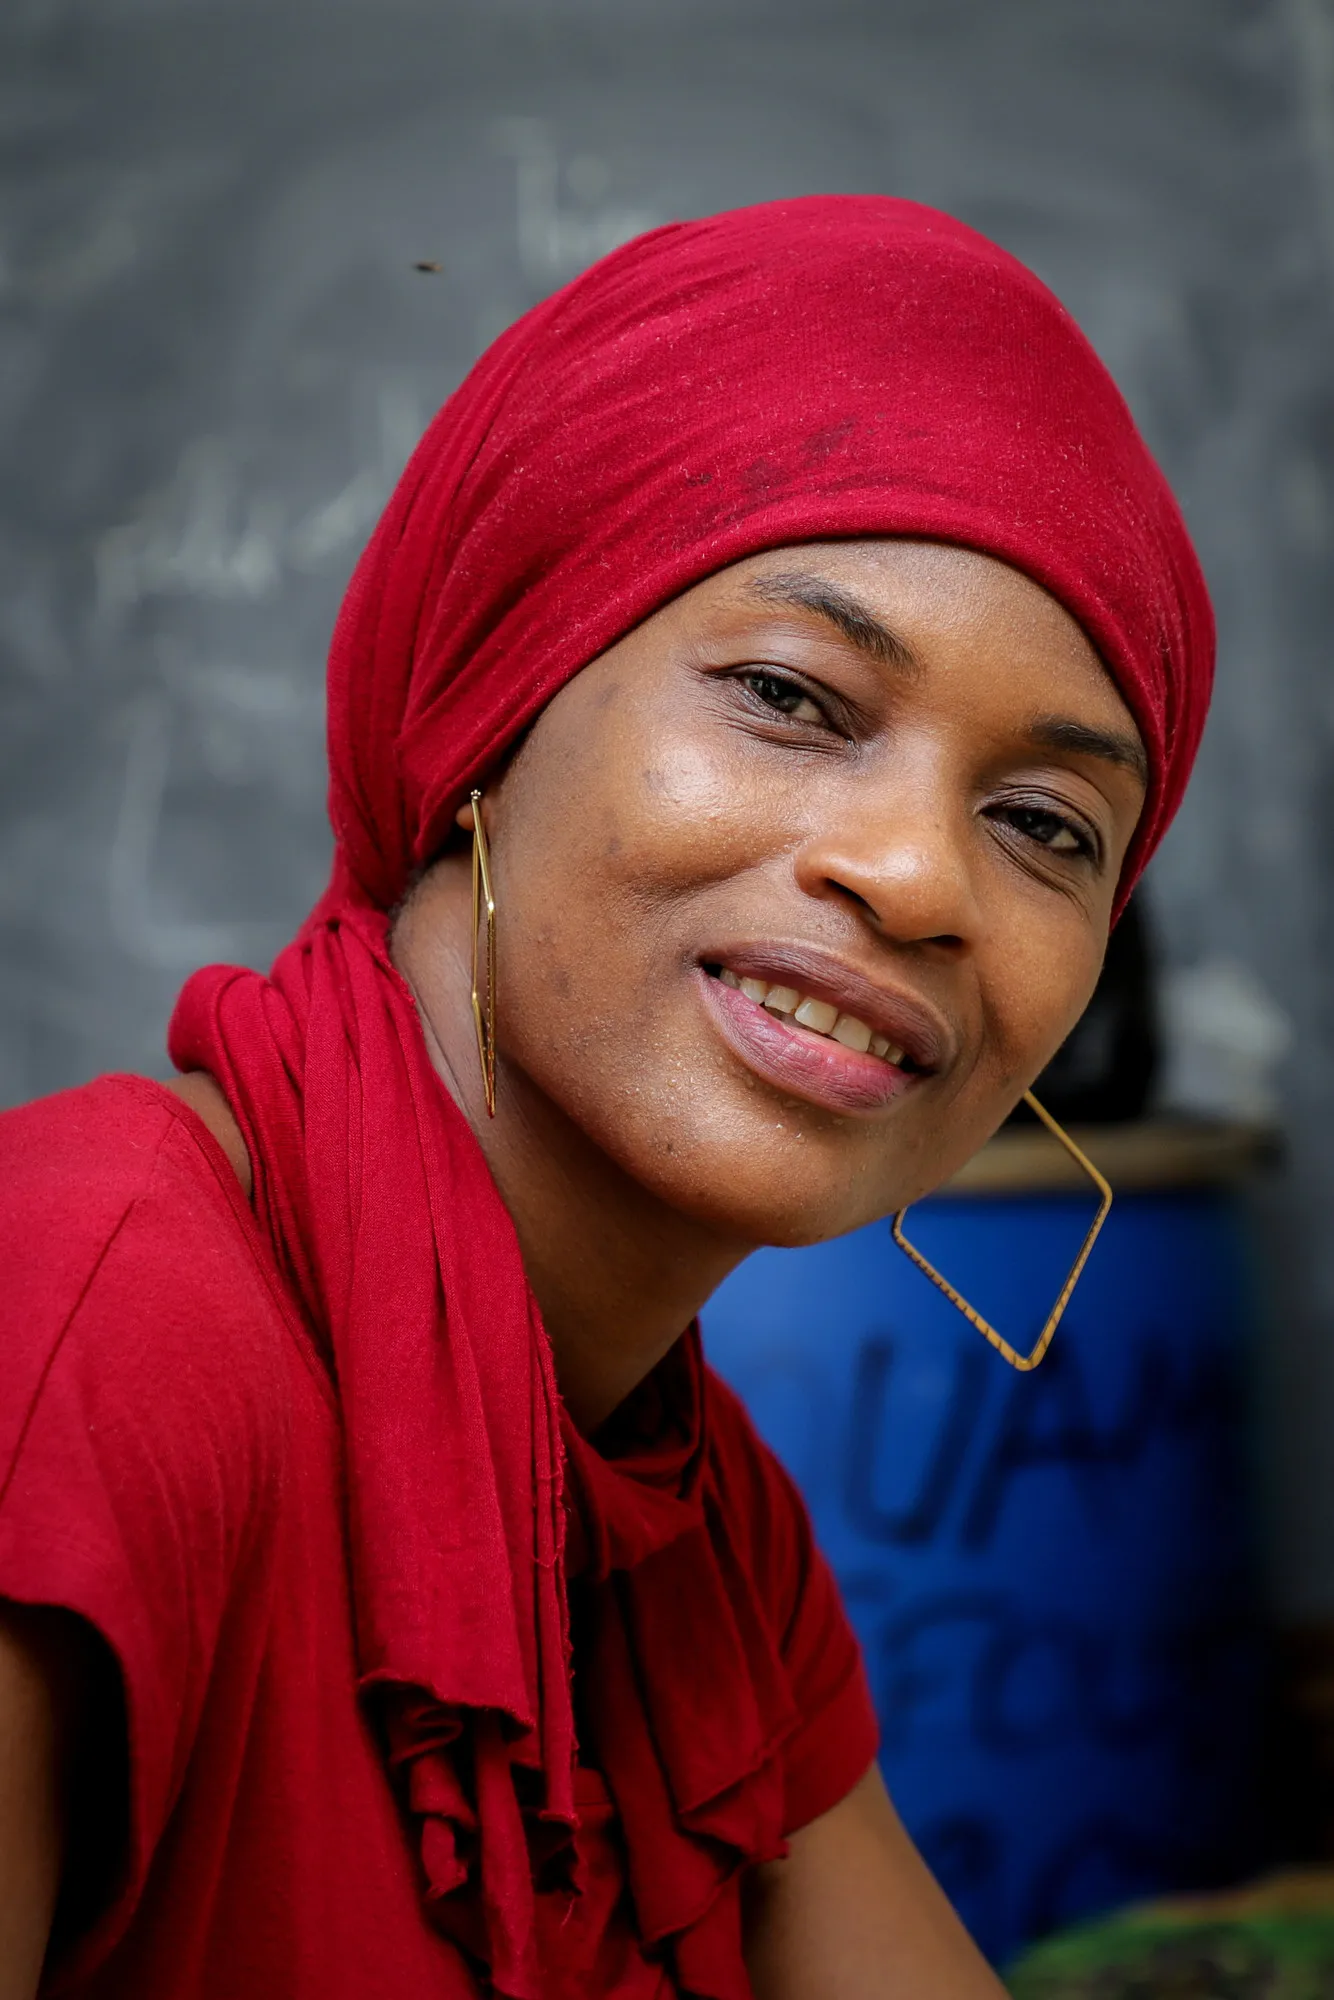 A woman in a red head wrap sits and smiles.